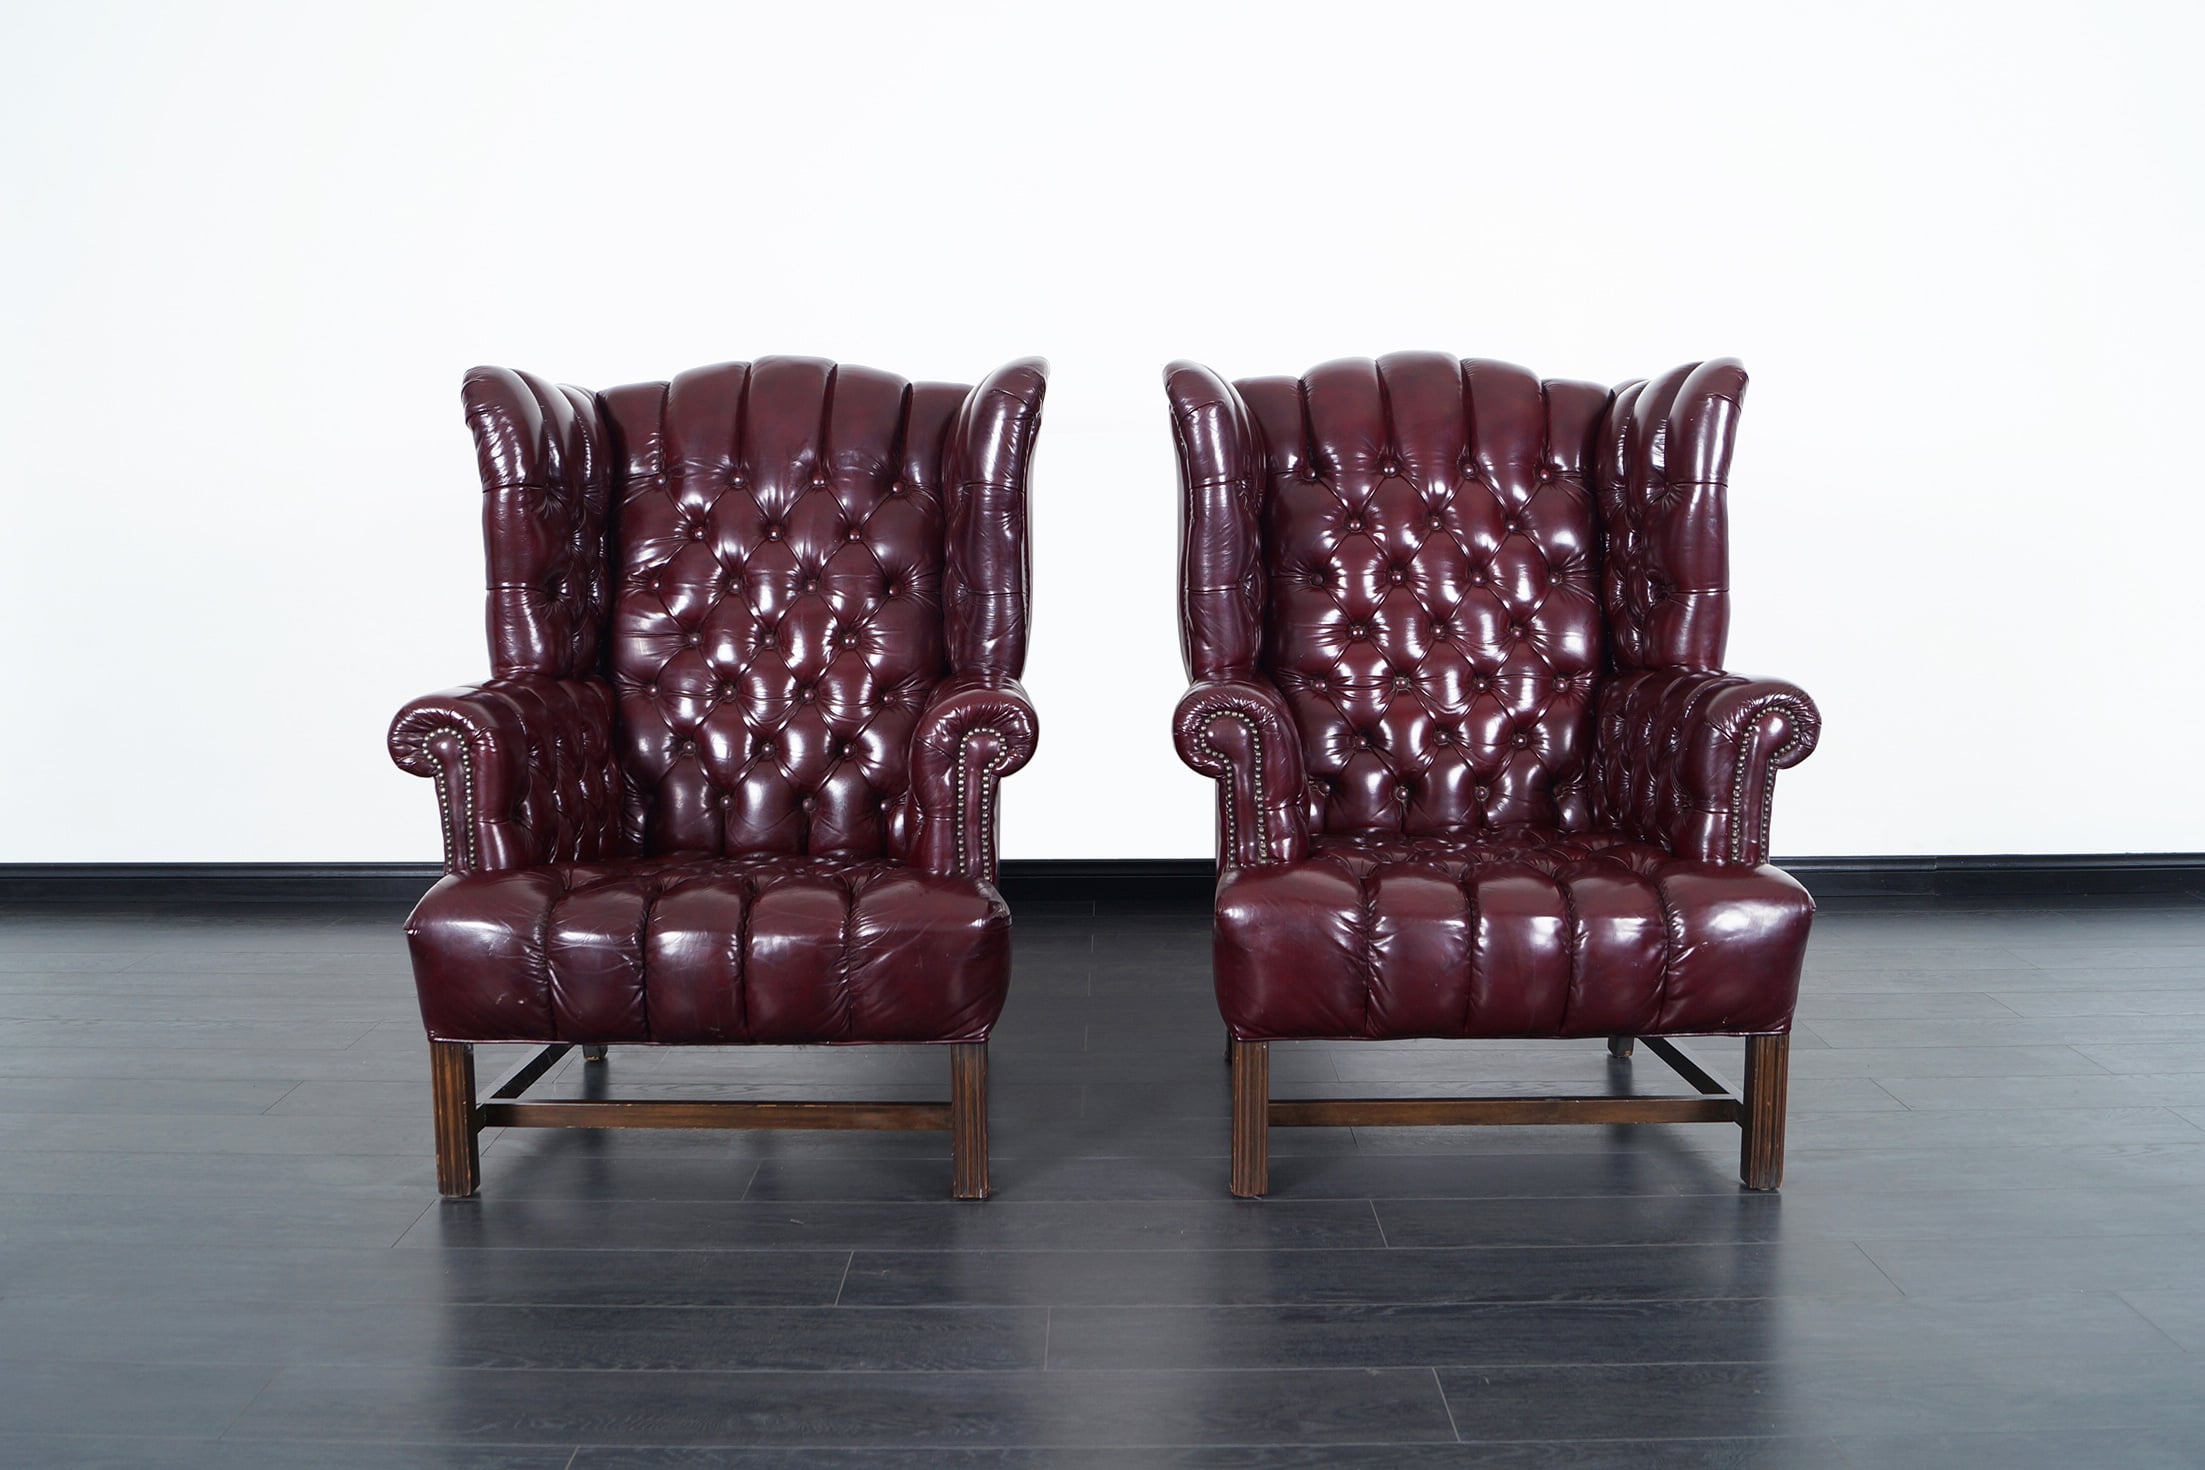 Vintage Leather Tufted Wingback Chairs